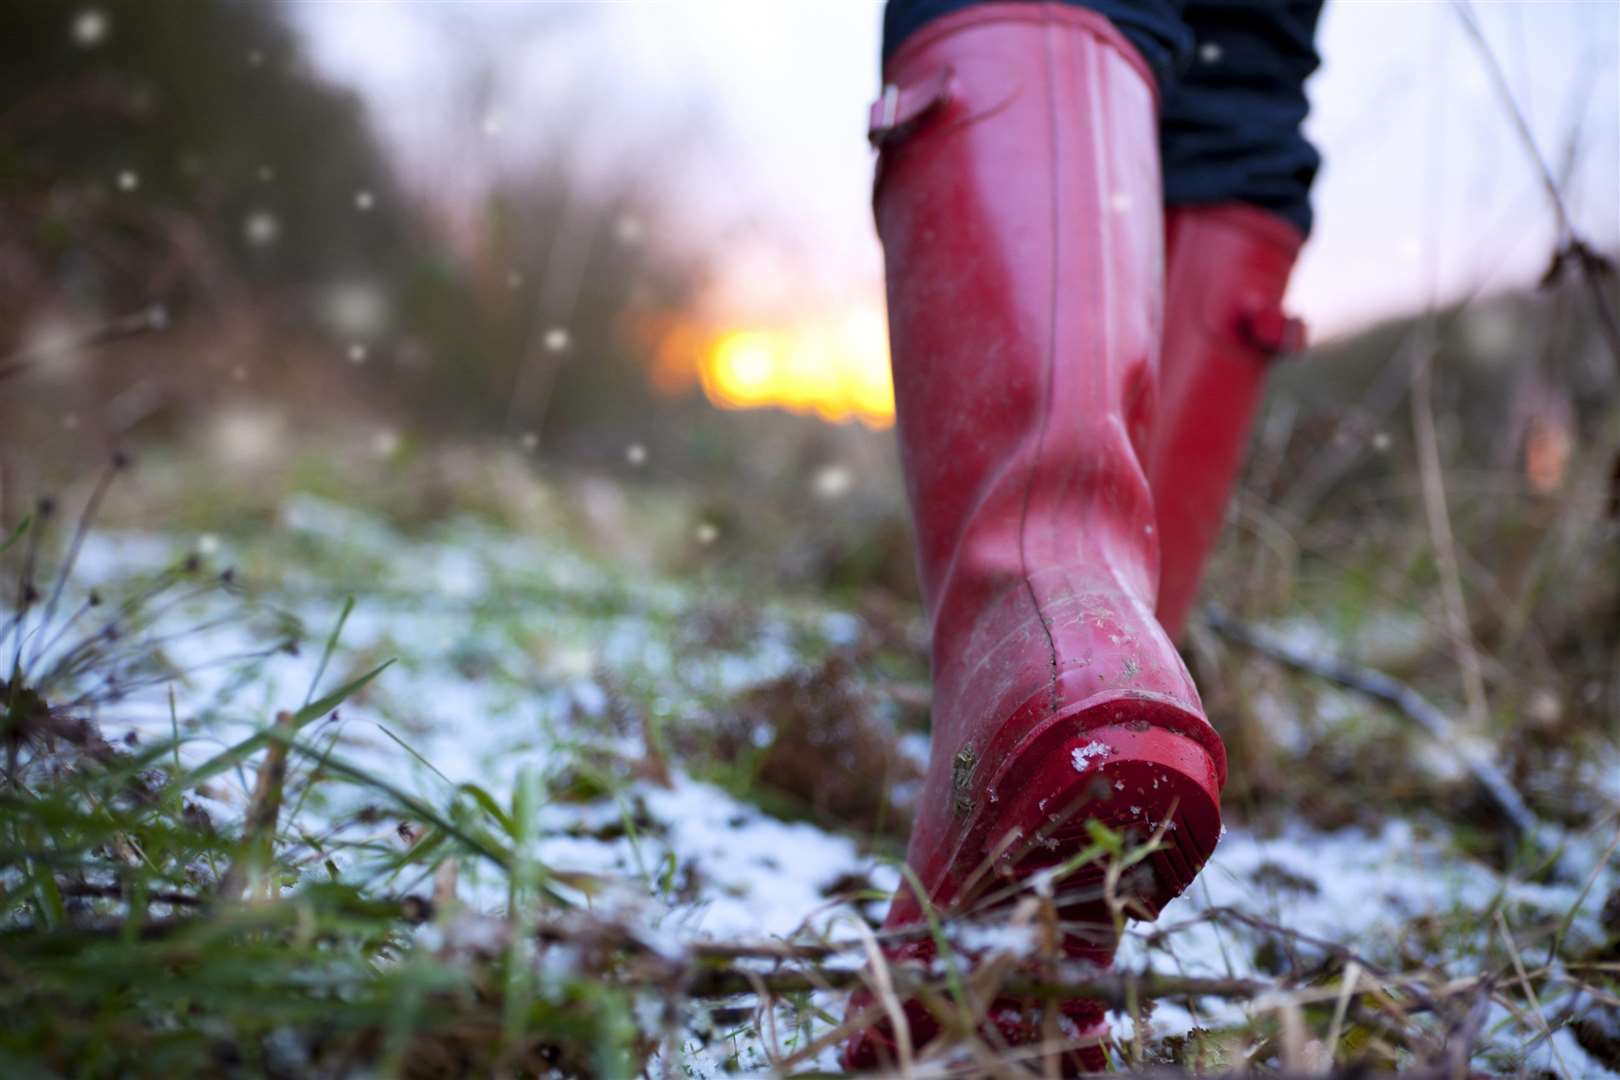 Are you keen to get the kids into wellies and out the house?